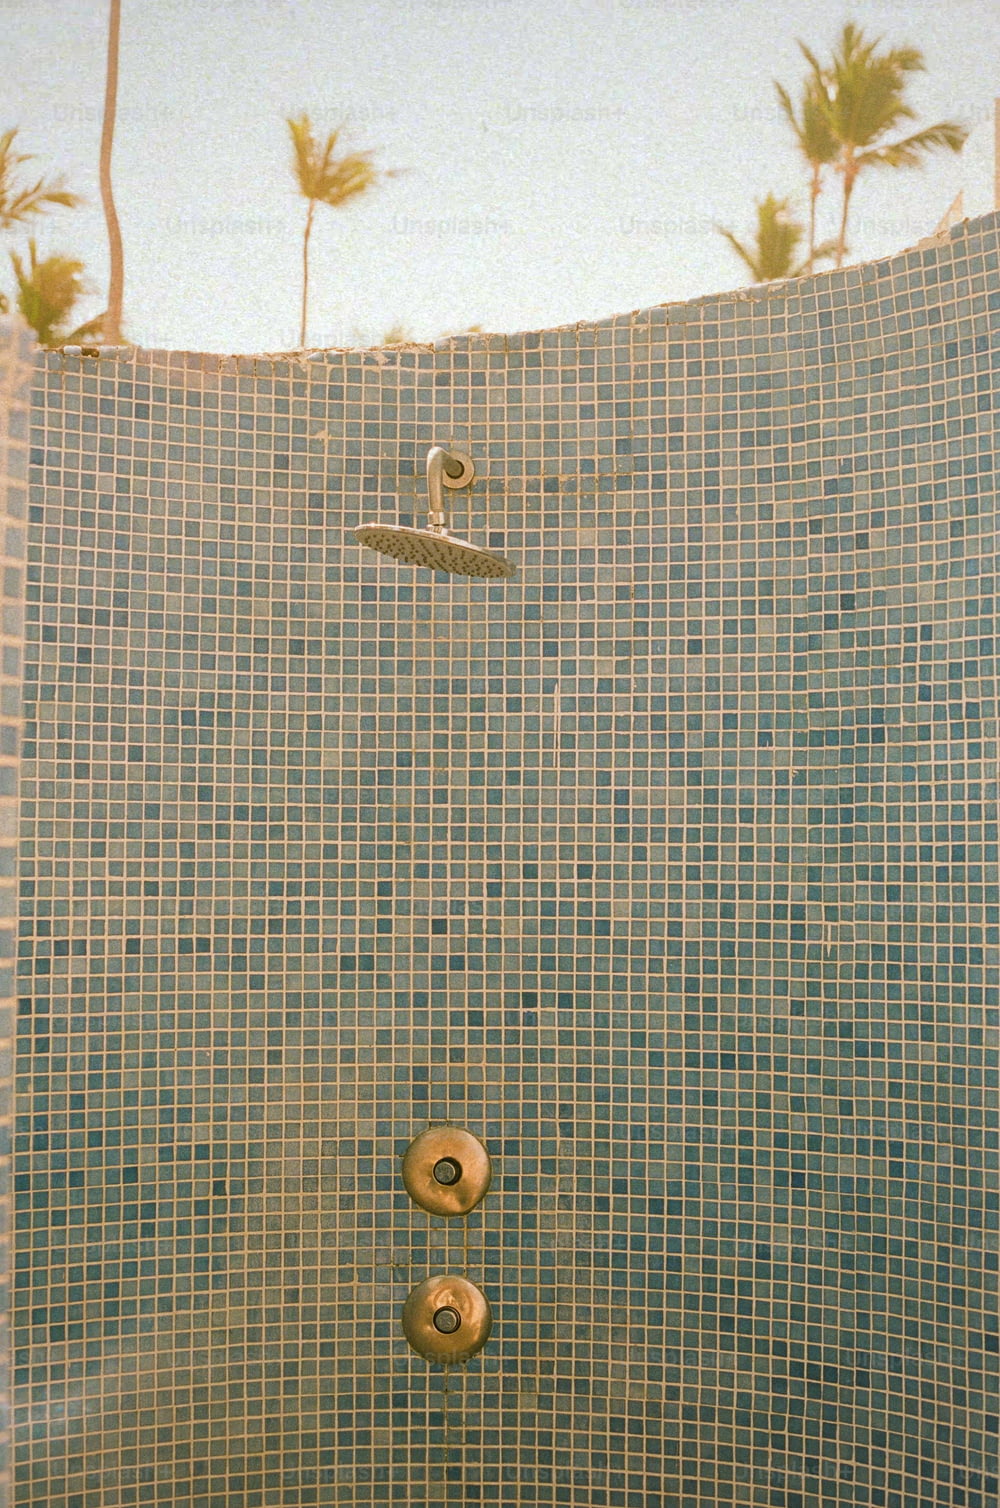 a tiled shower with a shower head and hand held shower faucet